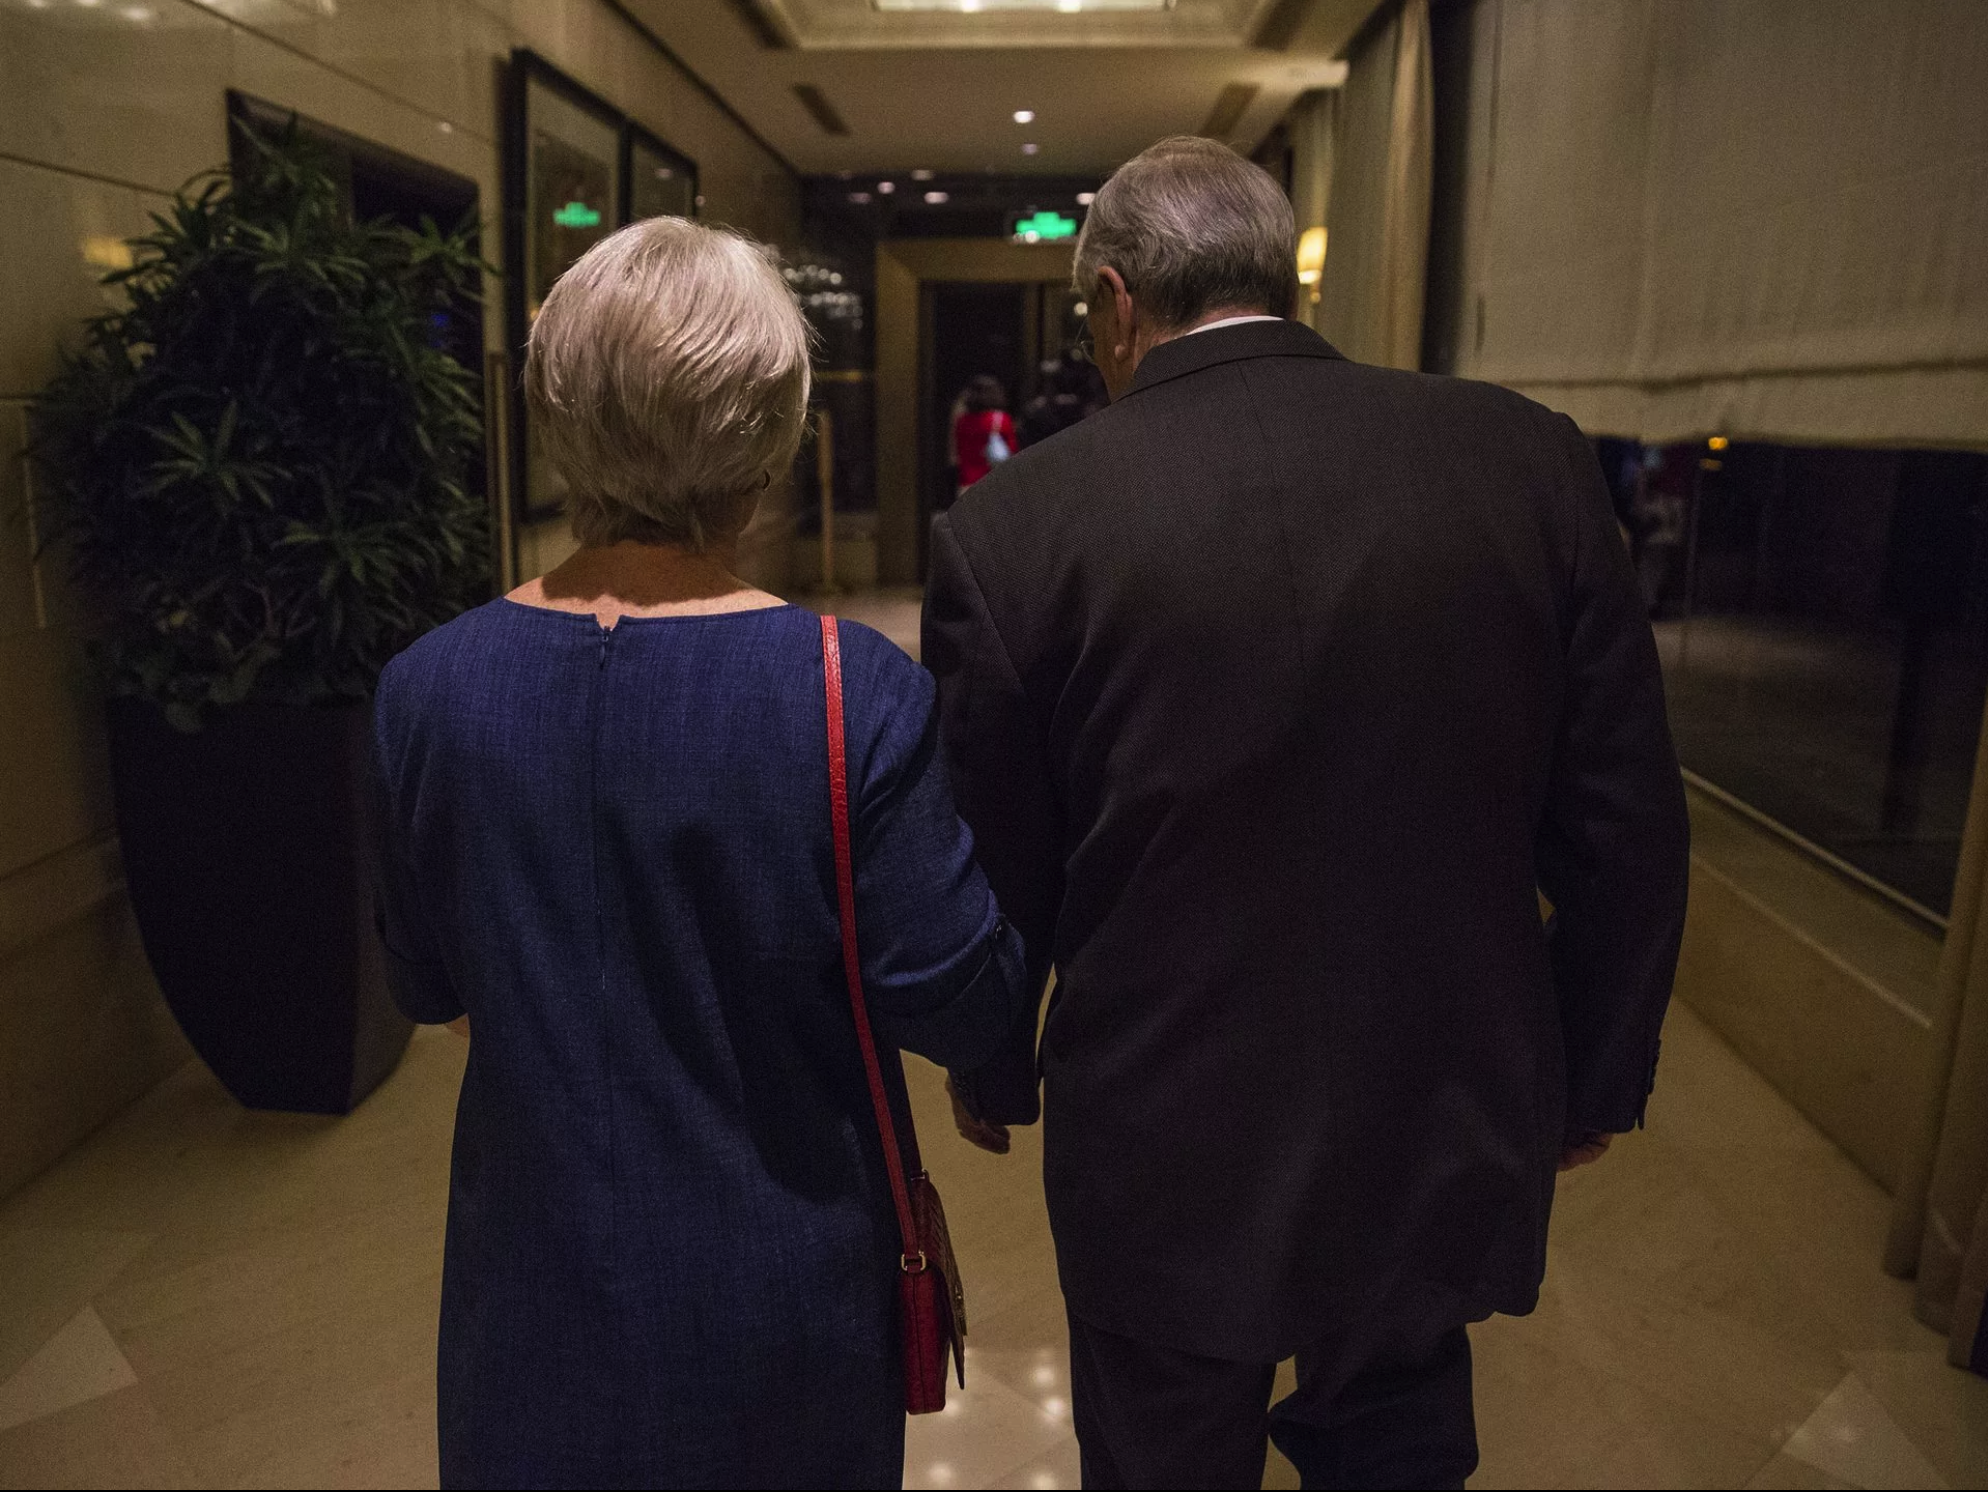 Terry Branstad, U.S. ambassador to China and his wife Chris Branstad leave the St. Regis hotel after an Iowa Sister States reception on Wednesday, Sept. 20, 2017, in Beijing, China. They walked home to their embassy residence, only a few blocks away, after the reception. Image by Kelsey Kremer. China, 2017.